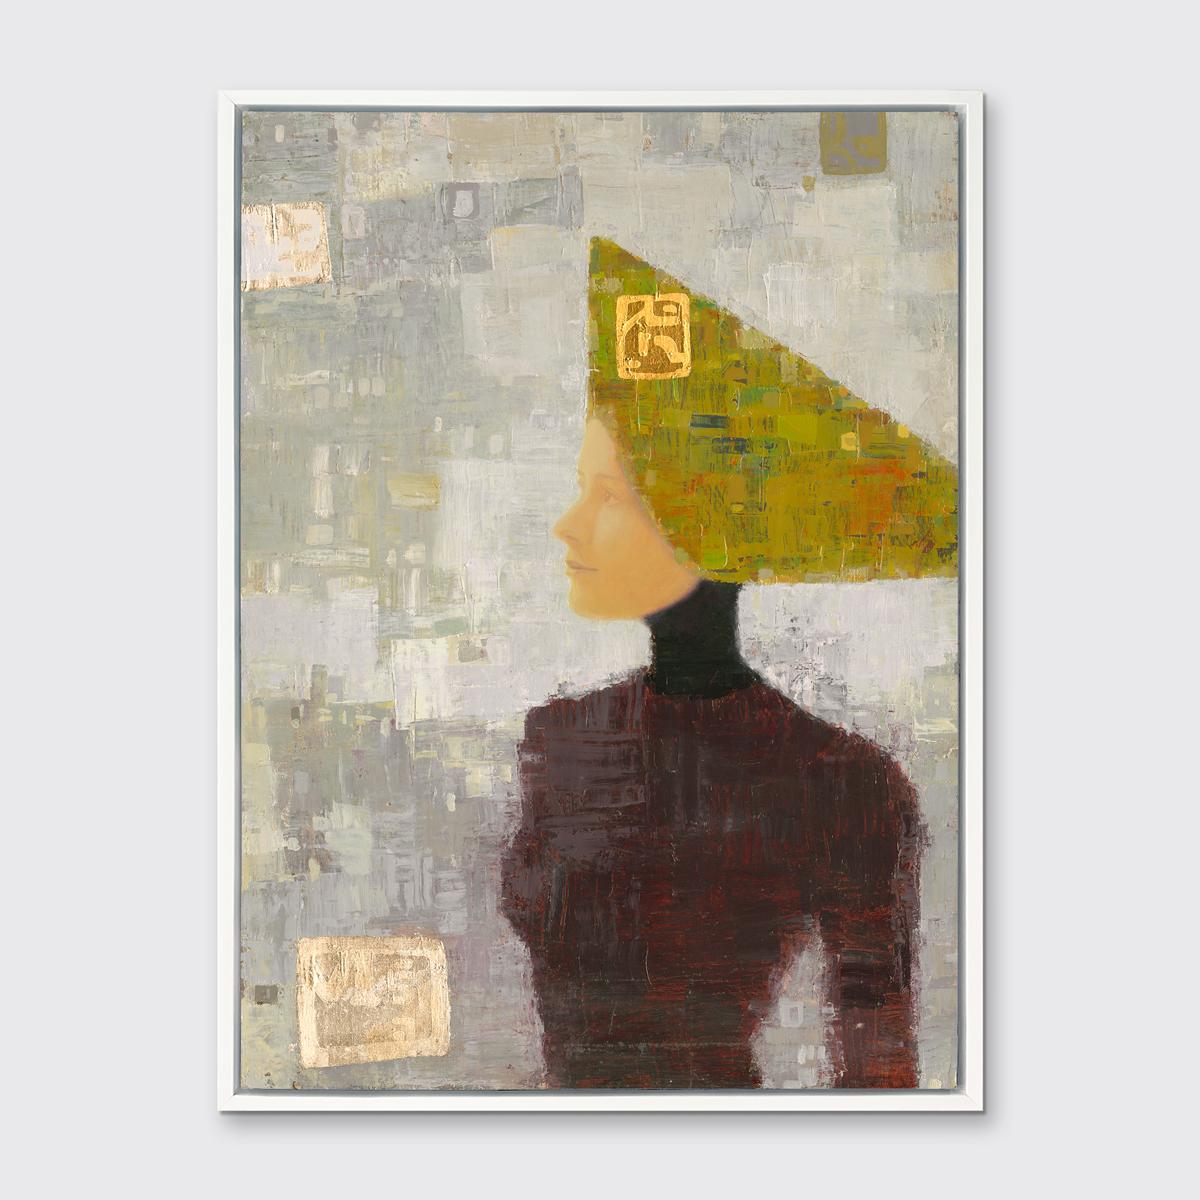 This abstract portrait limited edition print by Ned Martin is part of his 